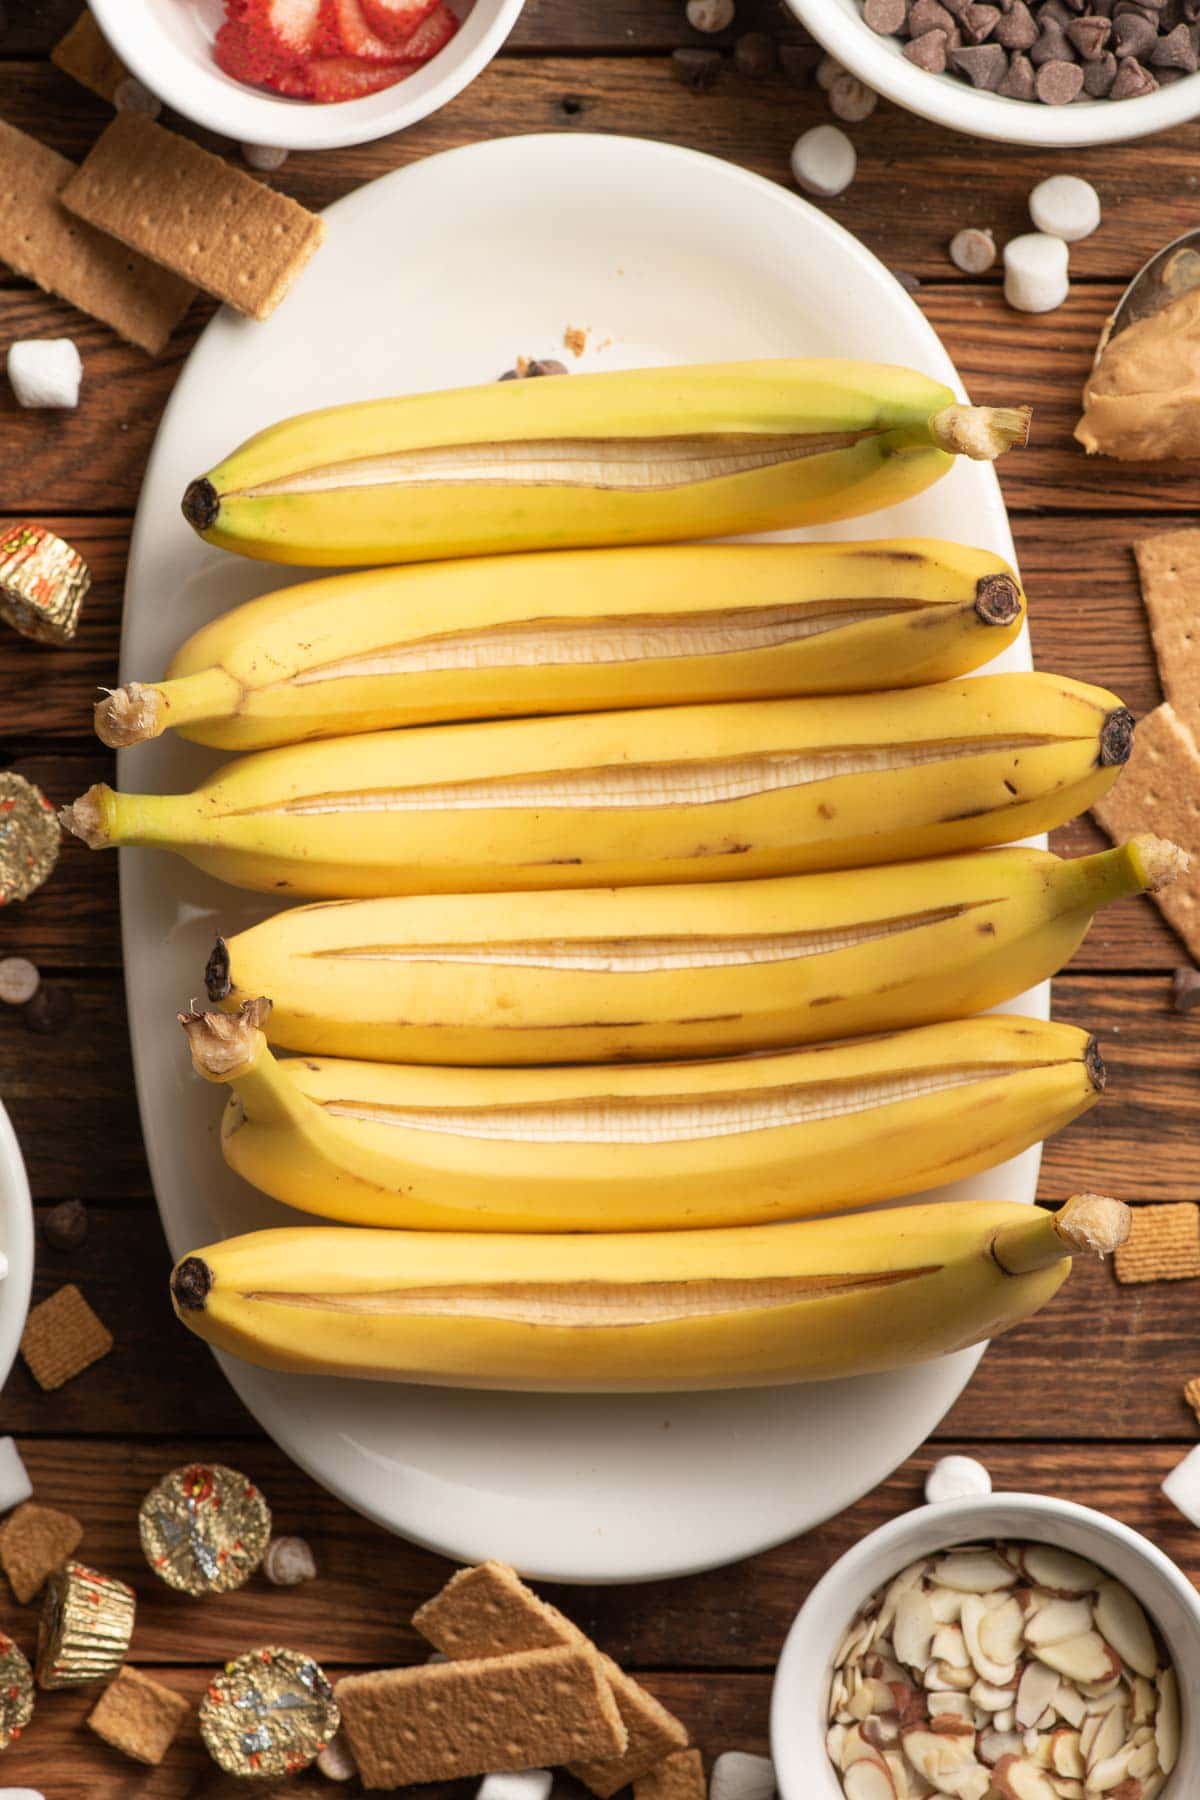 Bananas lined up on a white platter, with each one sliced down the middle.